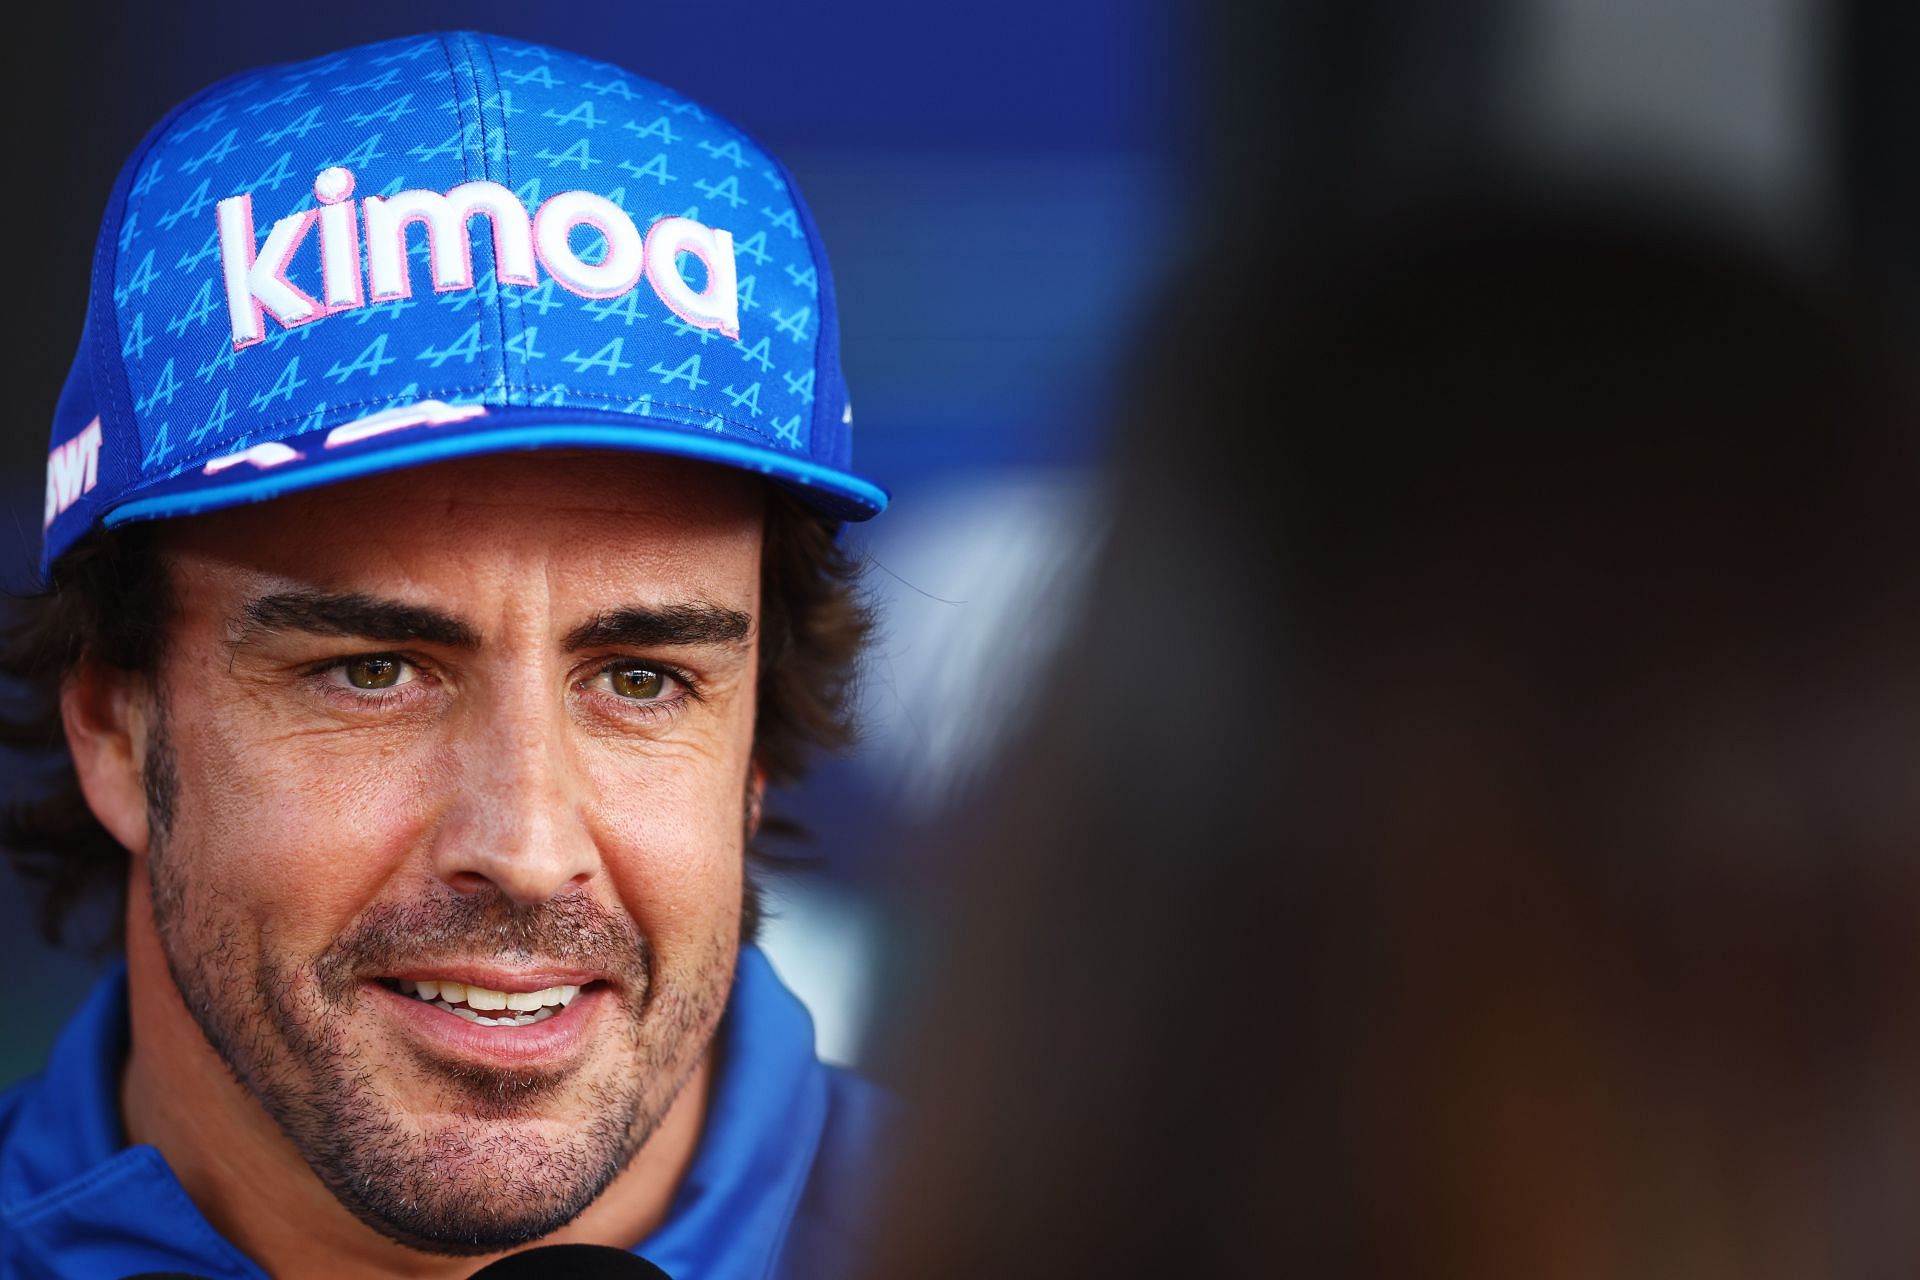 Fernando Alonso during previews ahead of the F1 Grand Prix of Hungary at Hungaroring on July 28, 2022 in Budapest, Hungary. (Photo by Francois Nel/Getty Images)